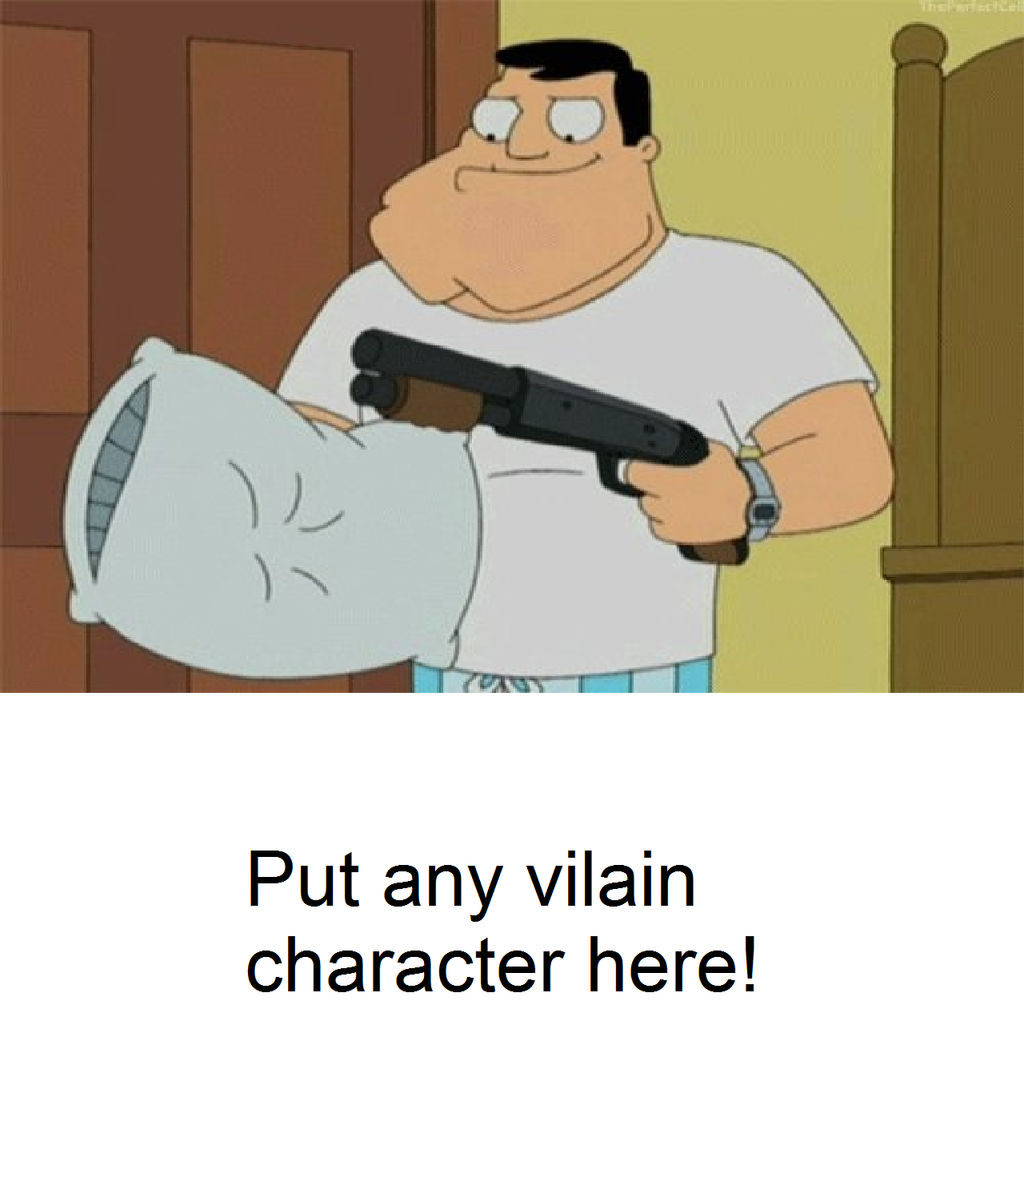 Stan Is Ready To Fight A Blank Meme By Mroyer7 On Deviantart